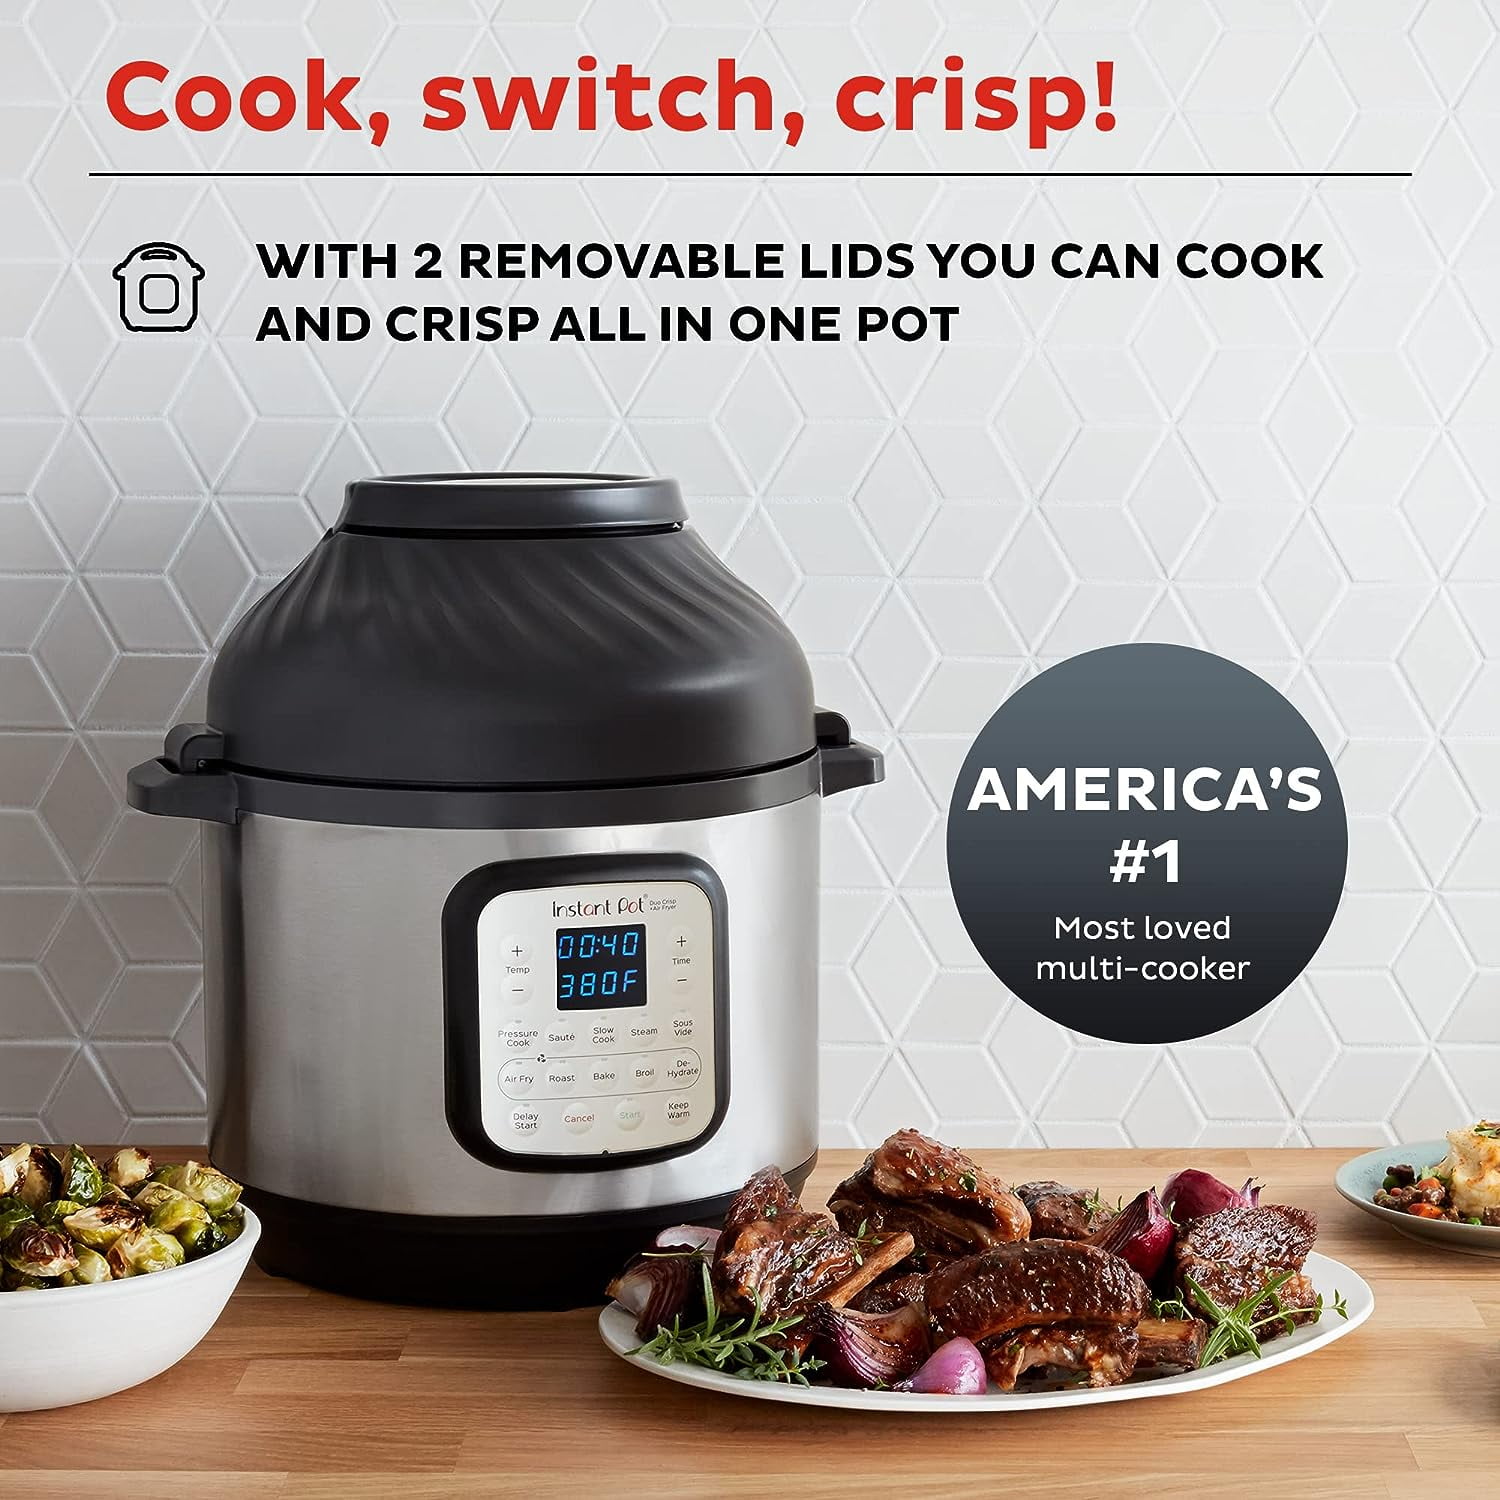 How to Use An Instant Pot - Instant Pot 101 - DUO CRISP + AIR